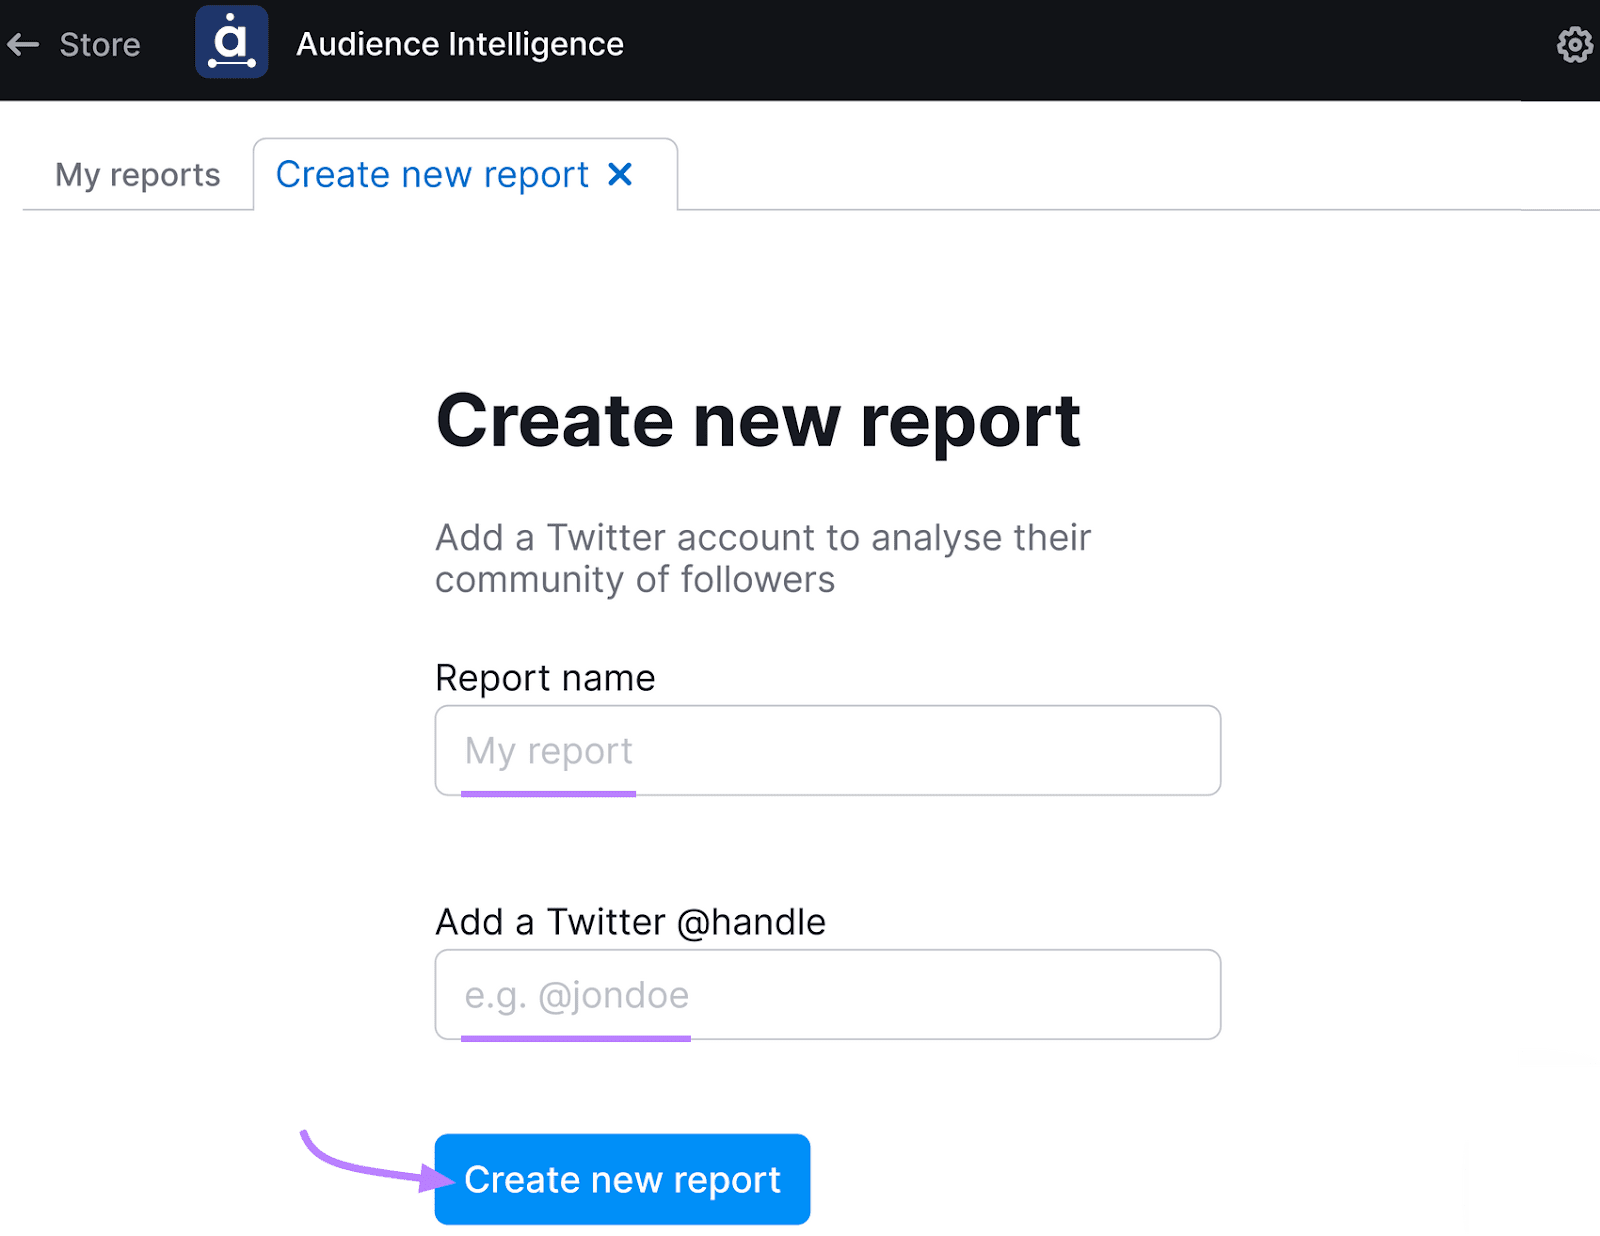 Audience Intelligence interface for creating a new report, with a prominent blue "Create new report" button at the bottom.